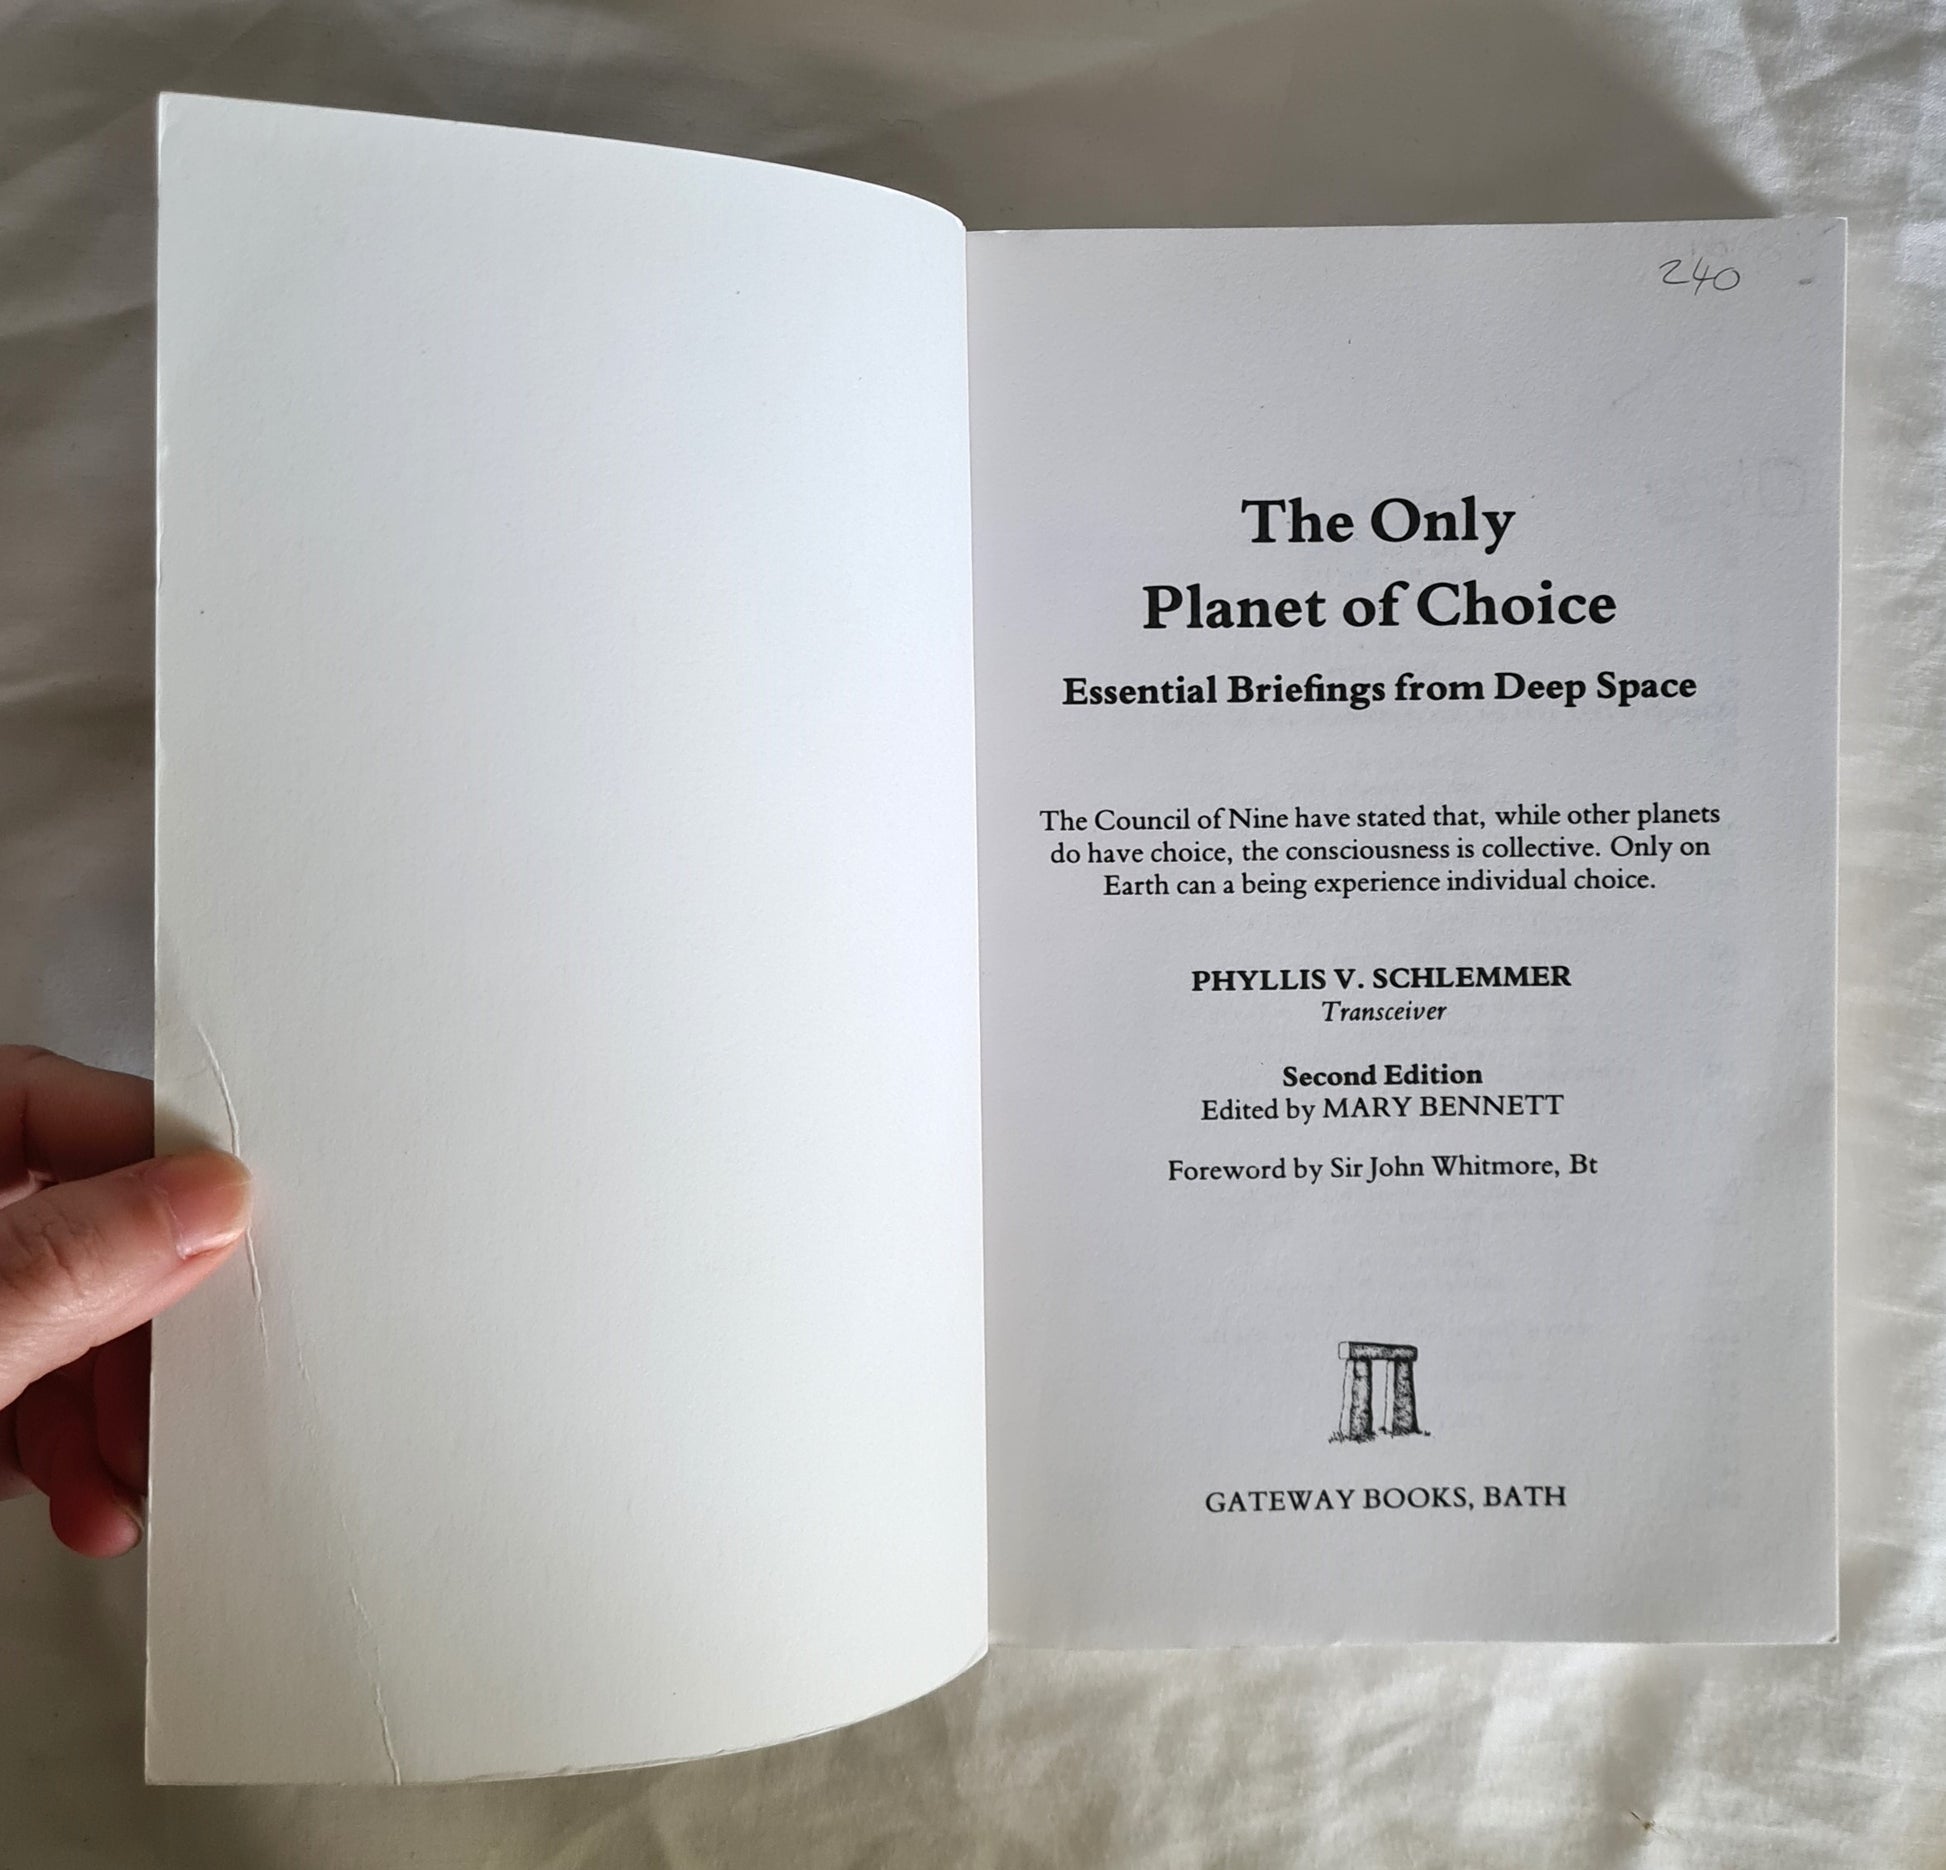 The Only Planet of Choice  Essential Briefings from Deep Space  by Phyllis V. Schlemmer  Edited by Mary Bennett